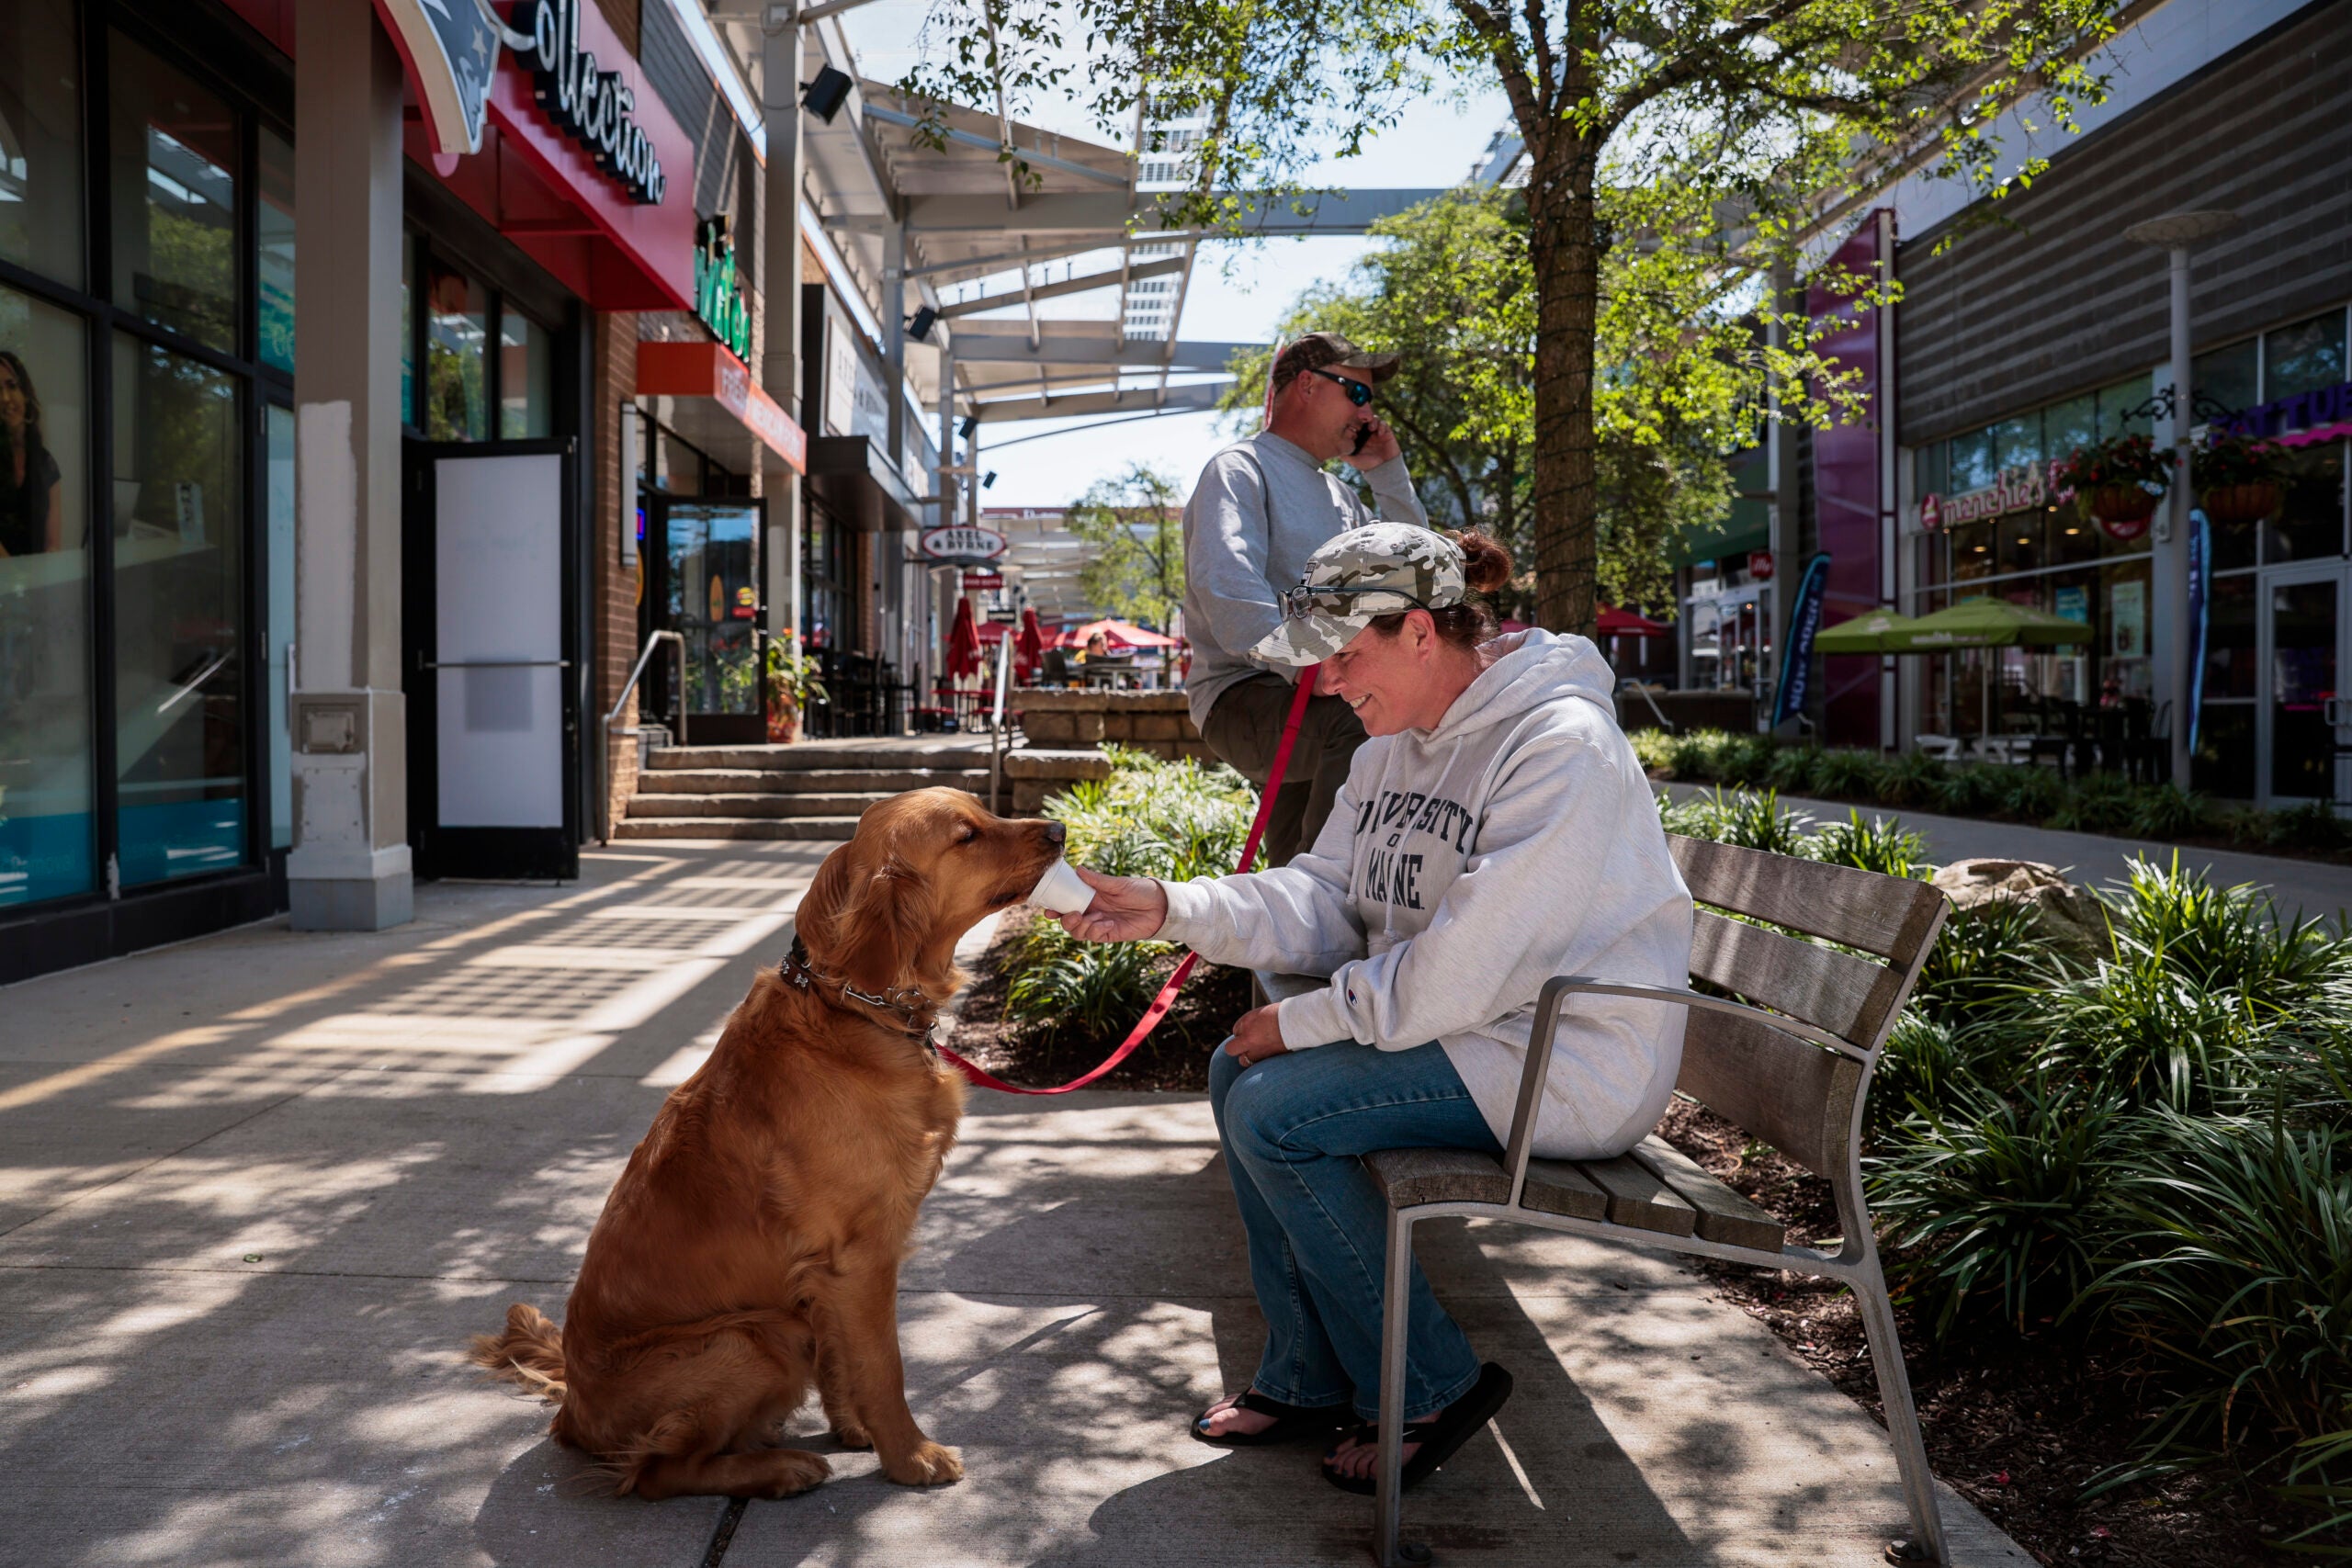 Boston weather -- Sterling the Golden Retriever enjoys some ice cream with his mom Jen Doliber as they spend the afternoon at Patriot Place shopping mall.